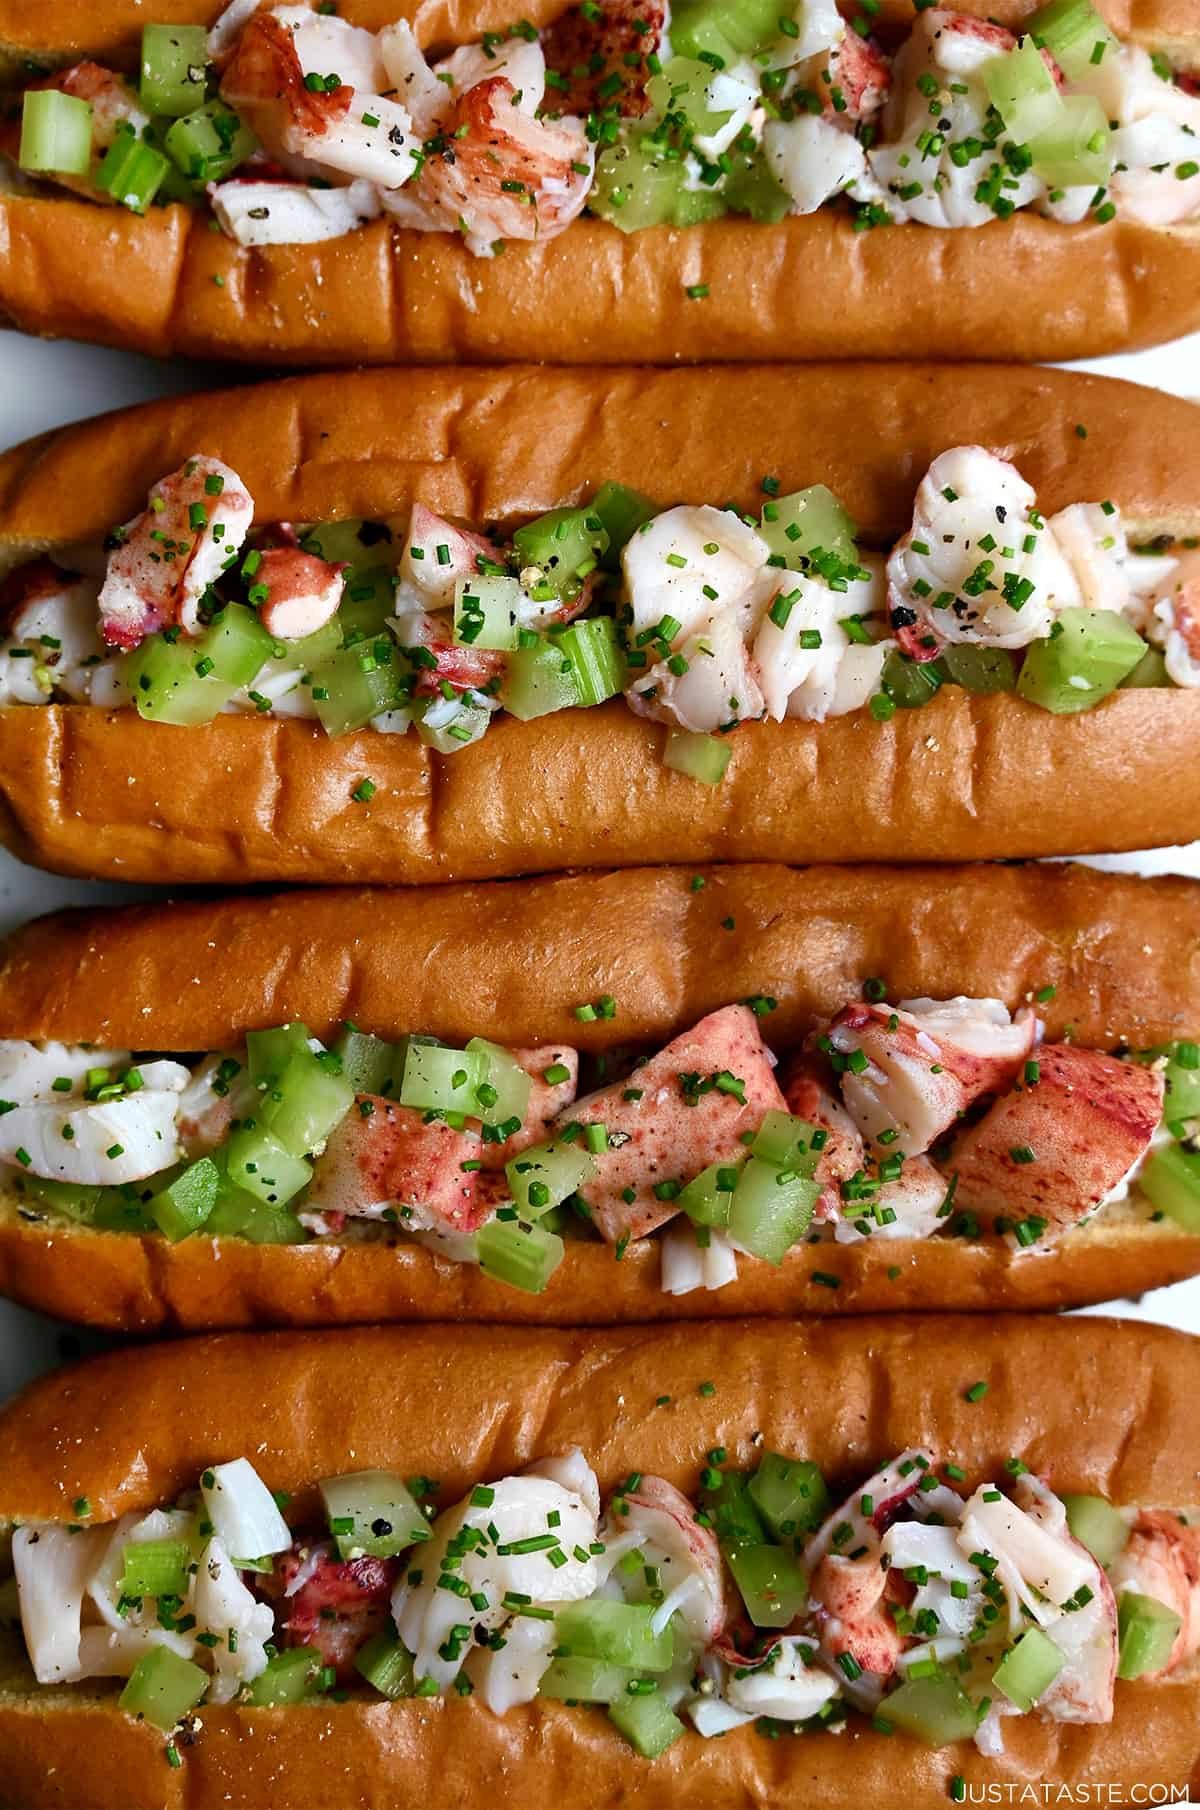 Split-top buns filled with lobster salad and garnished with black pepper and fresh chives.